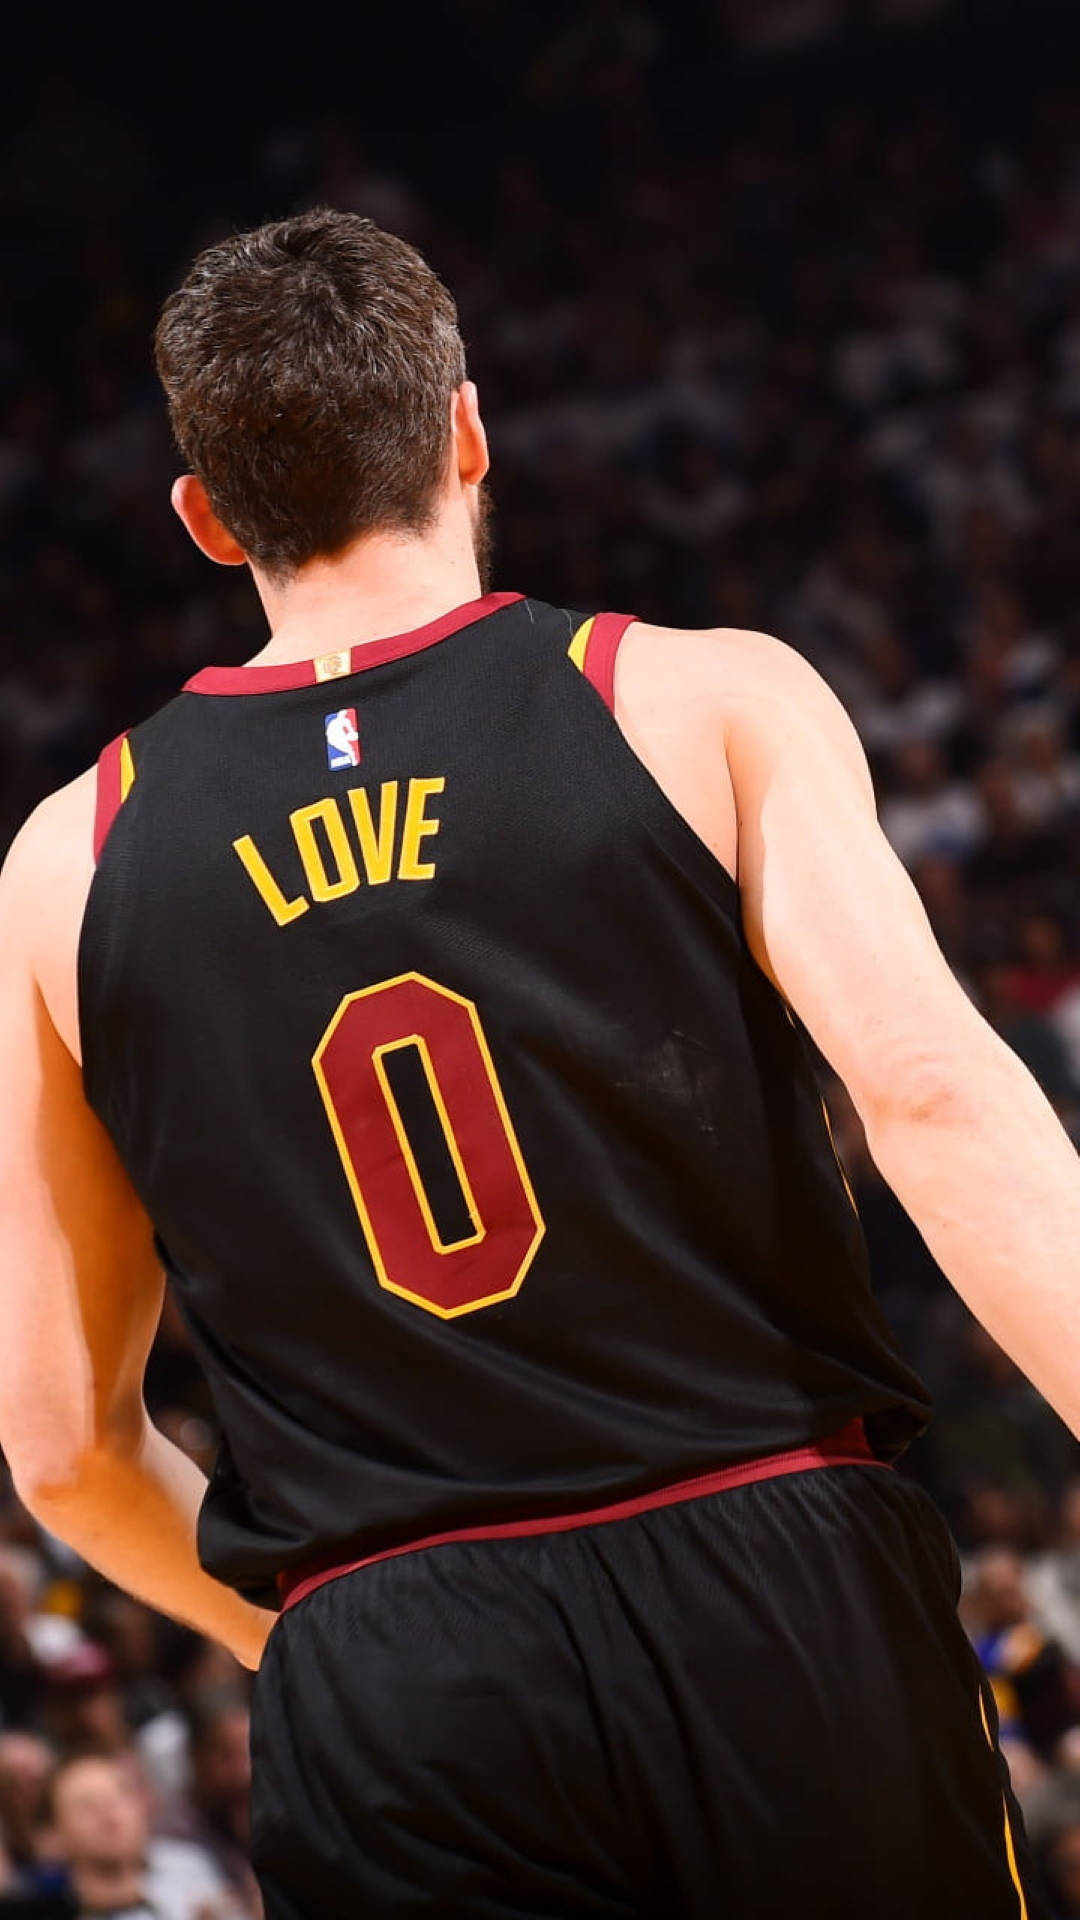 Kevin Love Player 0